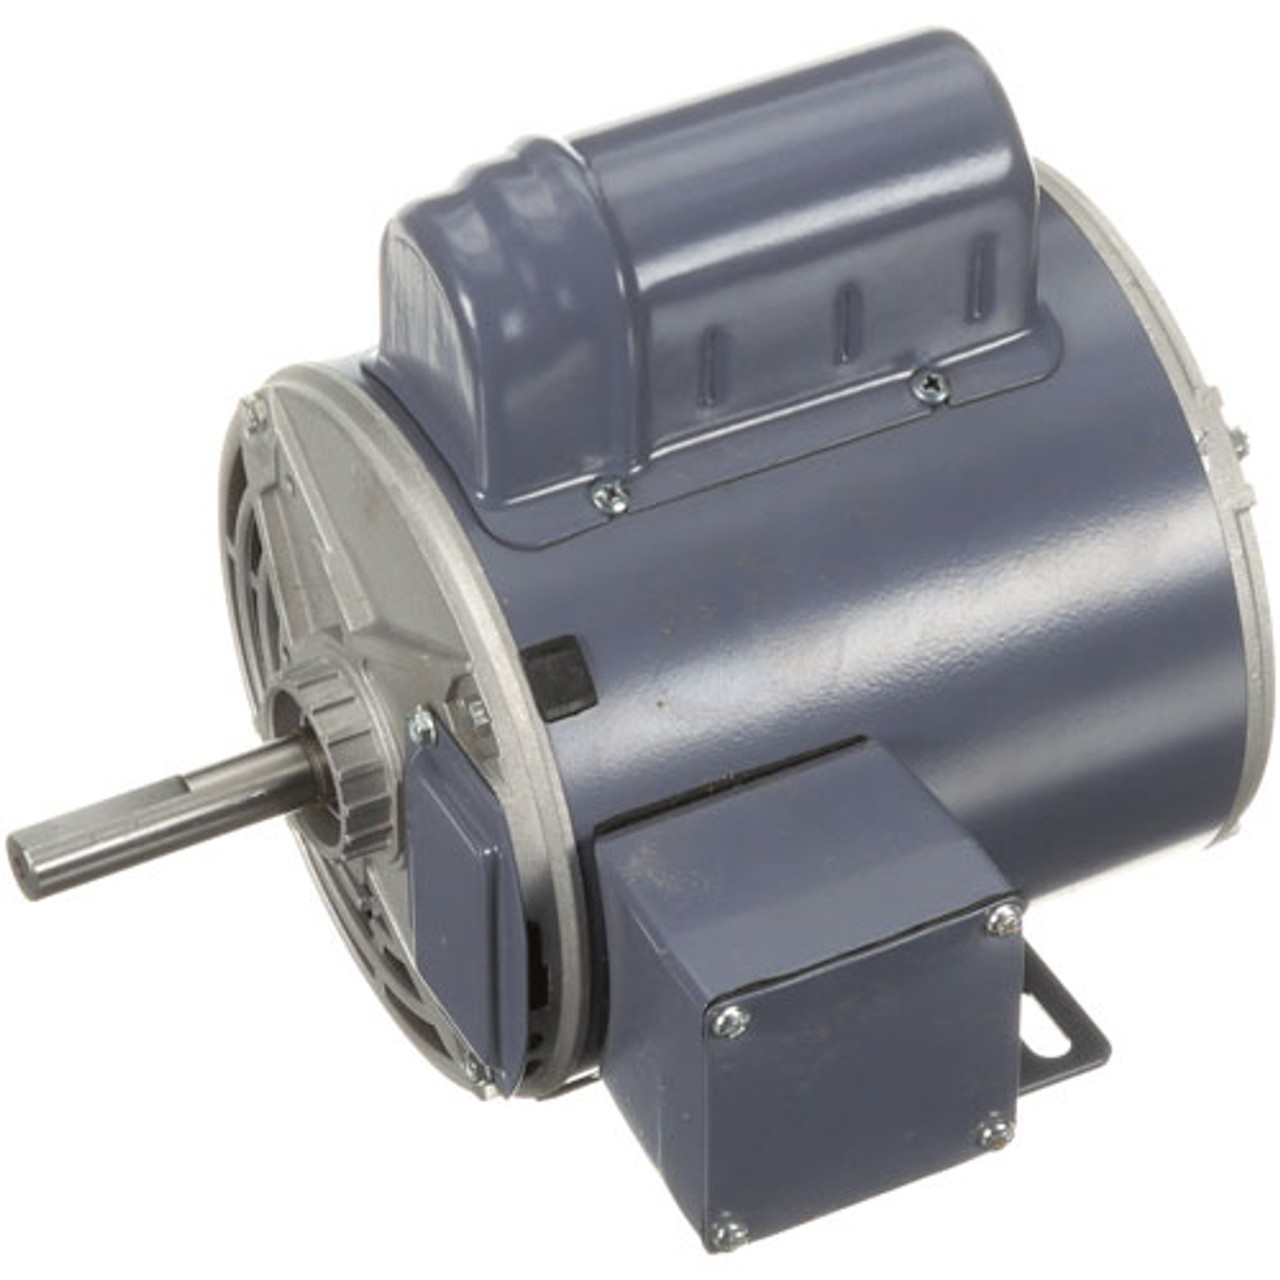 Motor - Replacement Part For Hobart 00-358516-00001